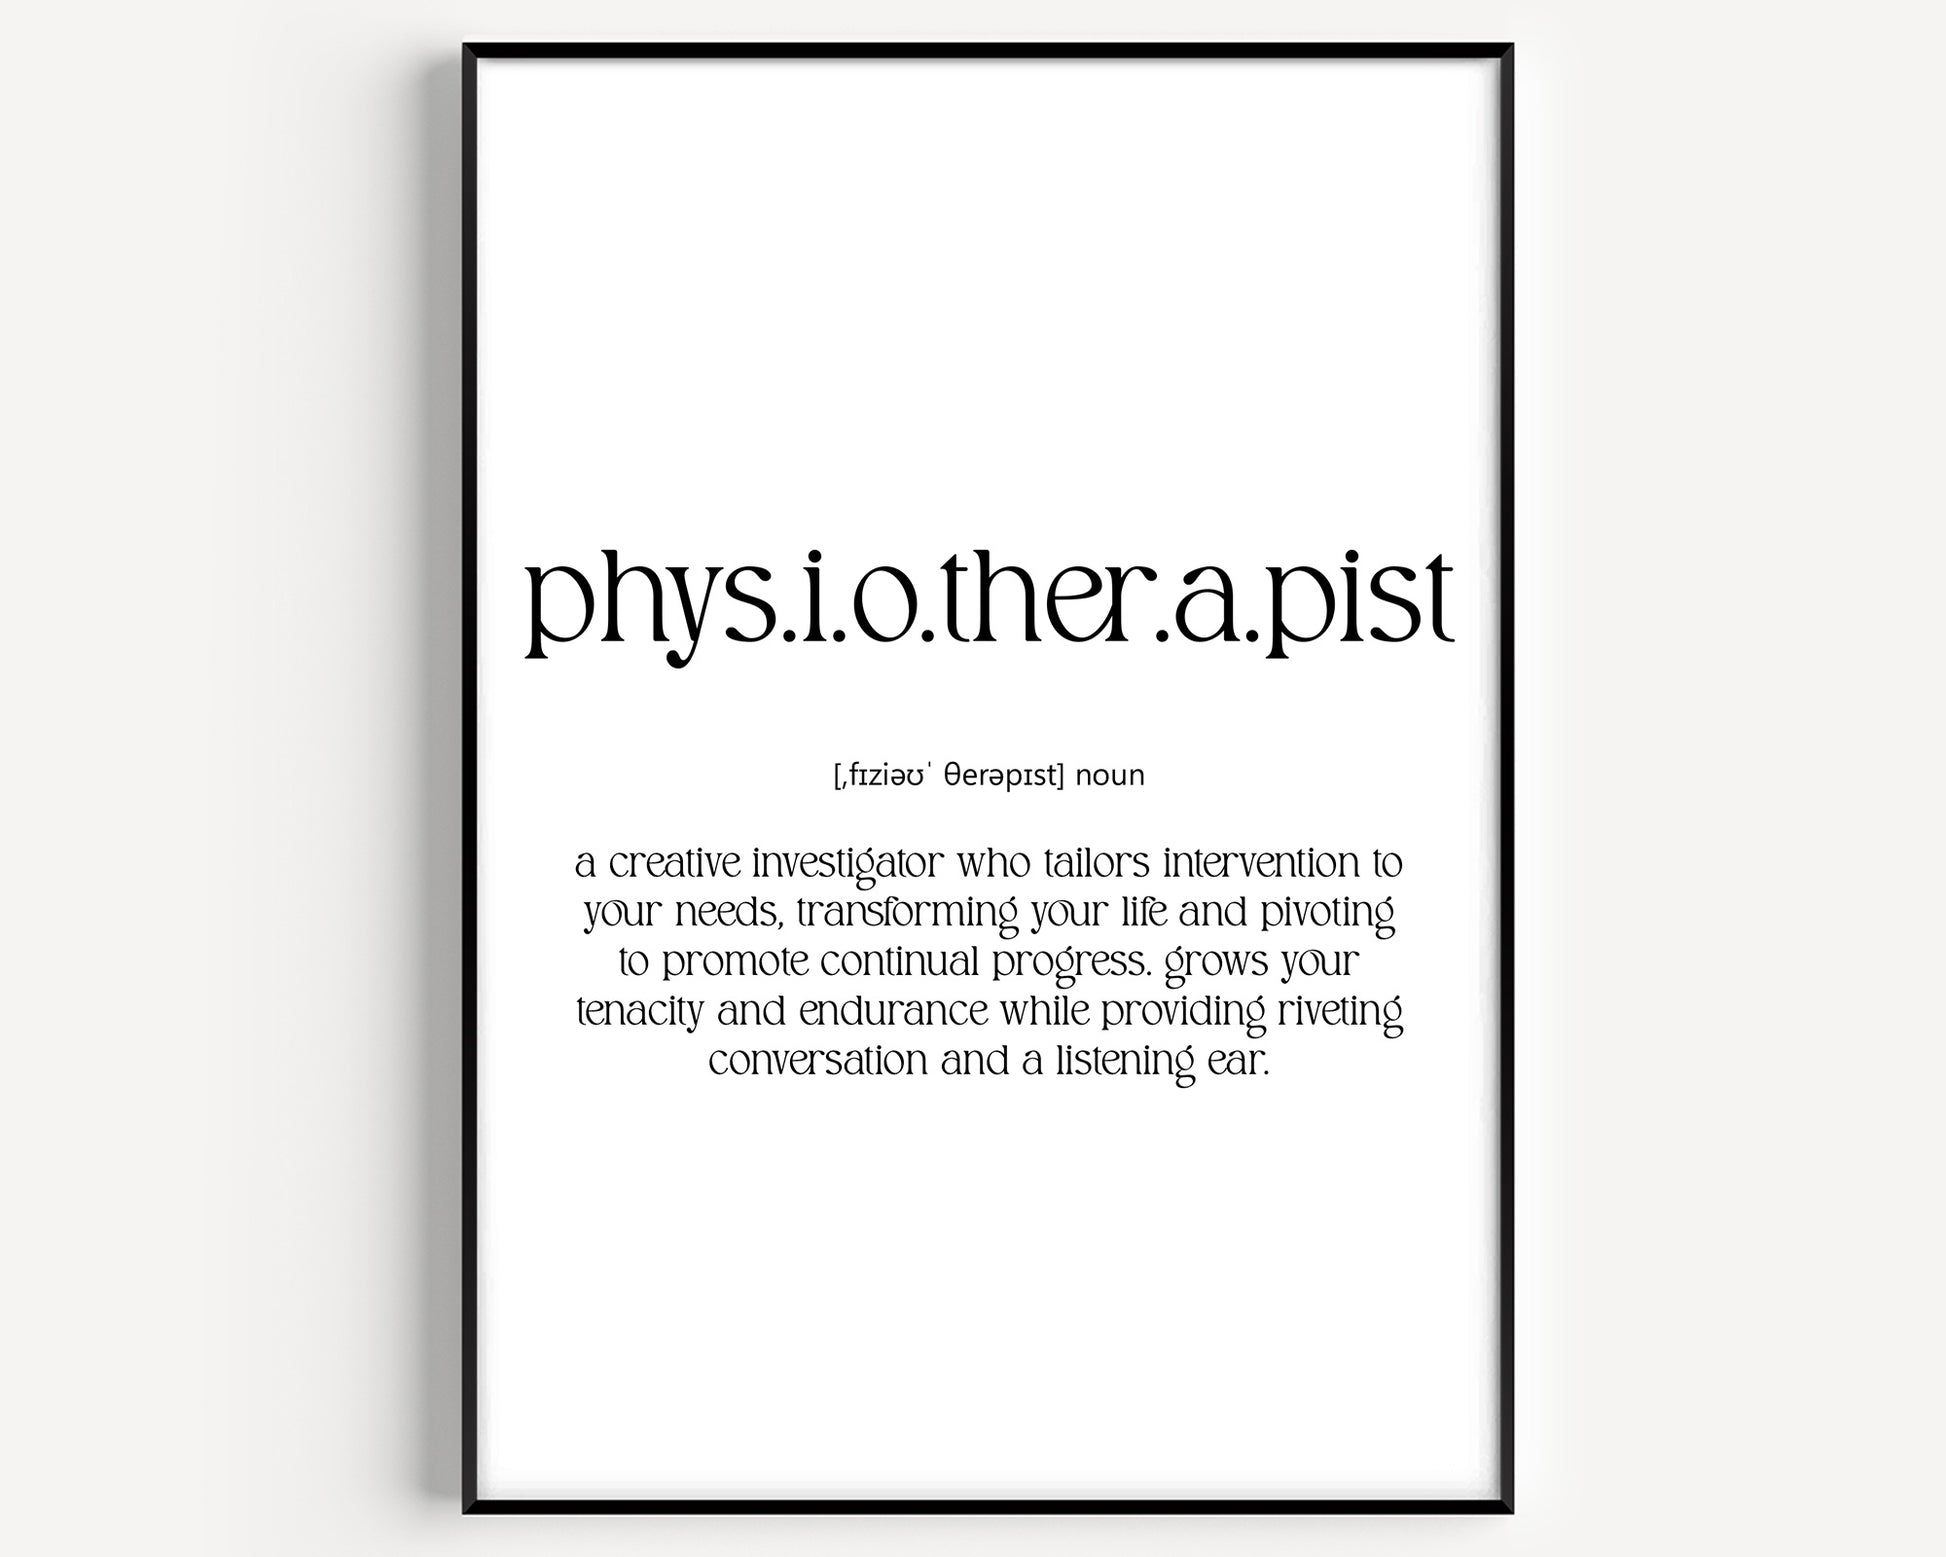 Physiotherapist Definition Print - Magic Posters